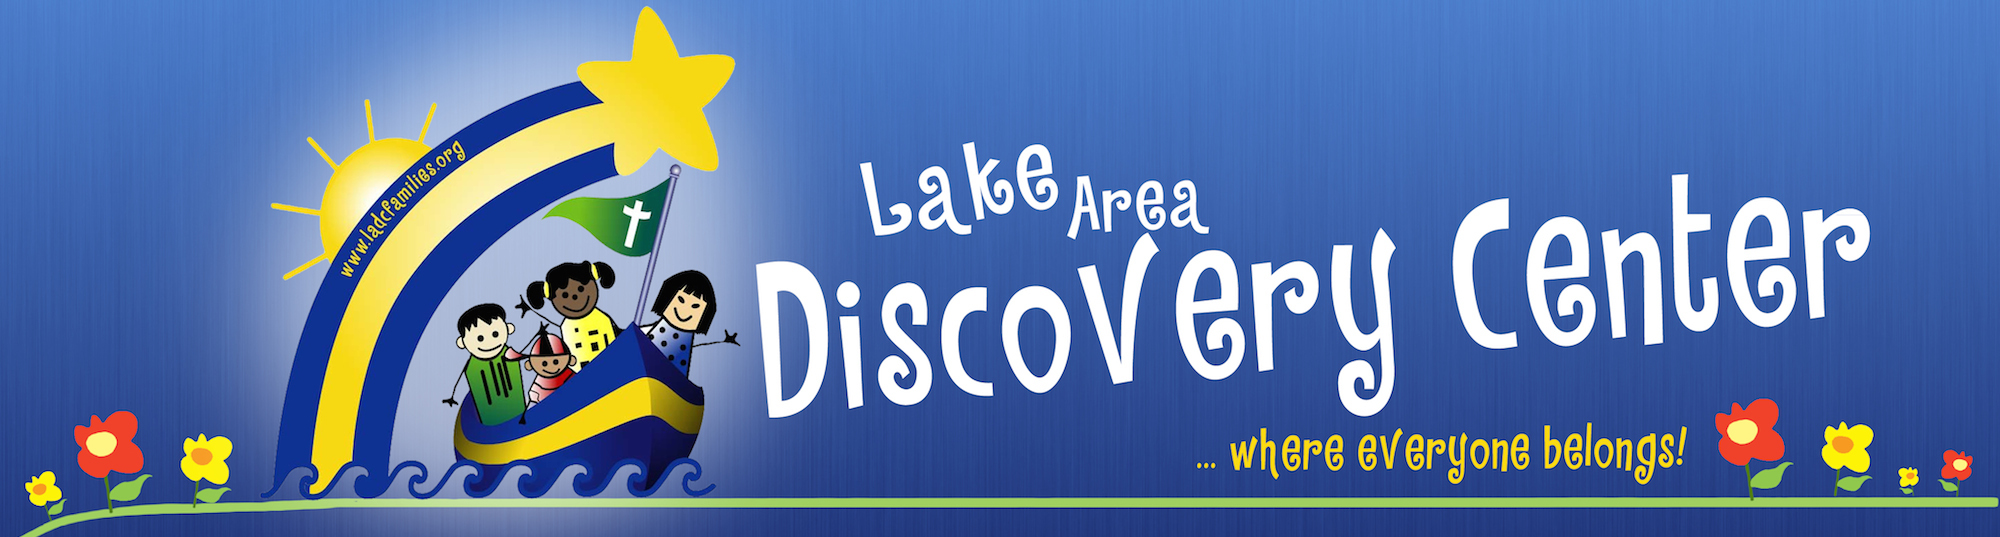 Lake Area Discovery Center at Annunciation